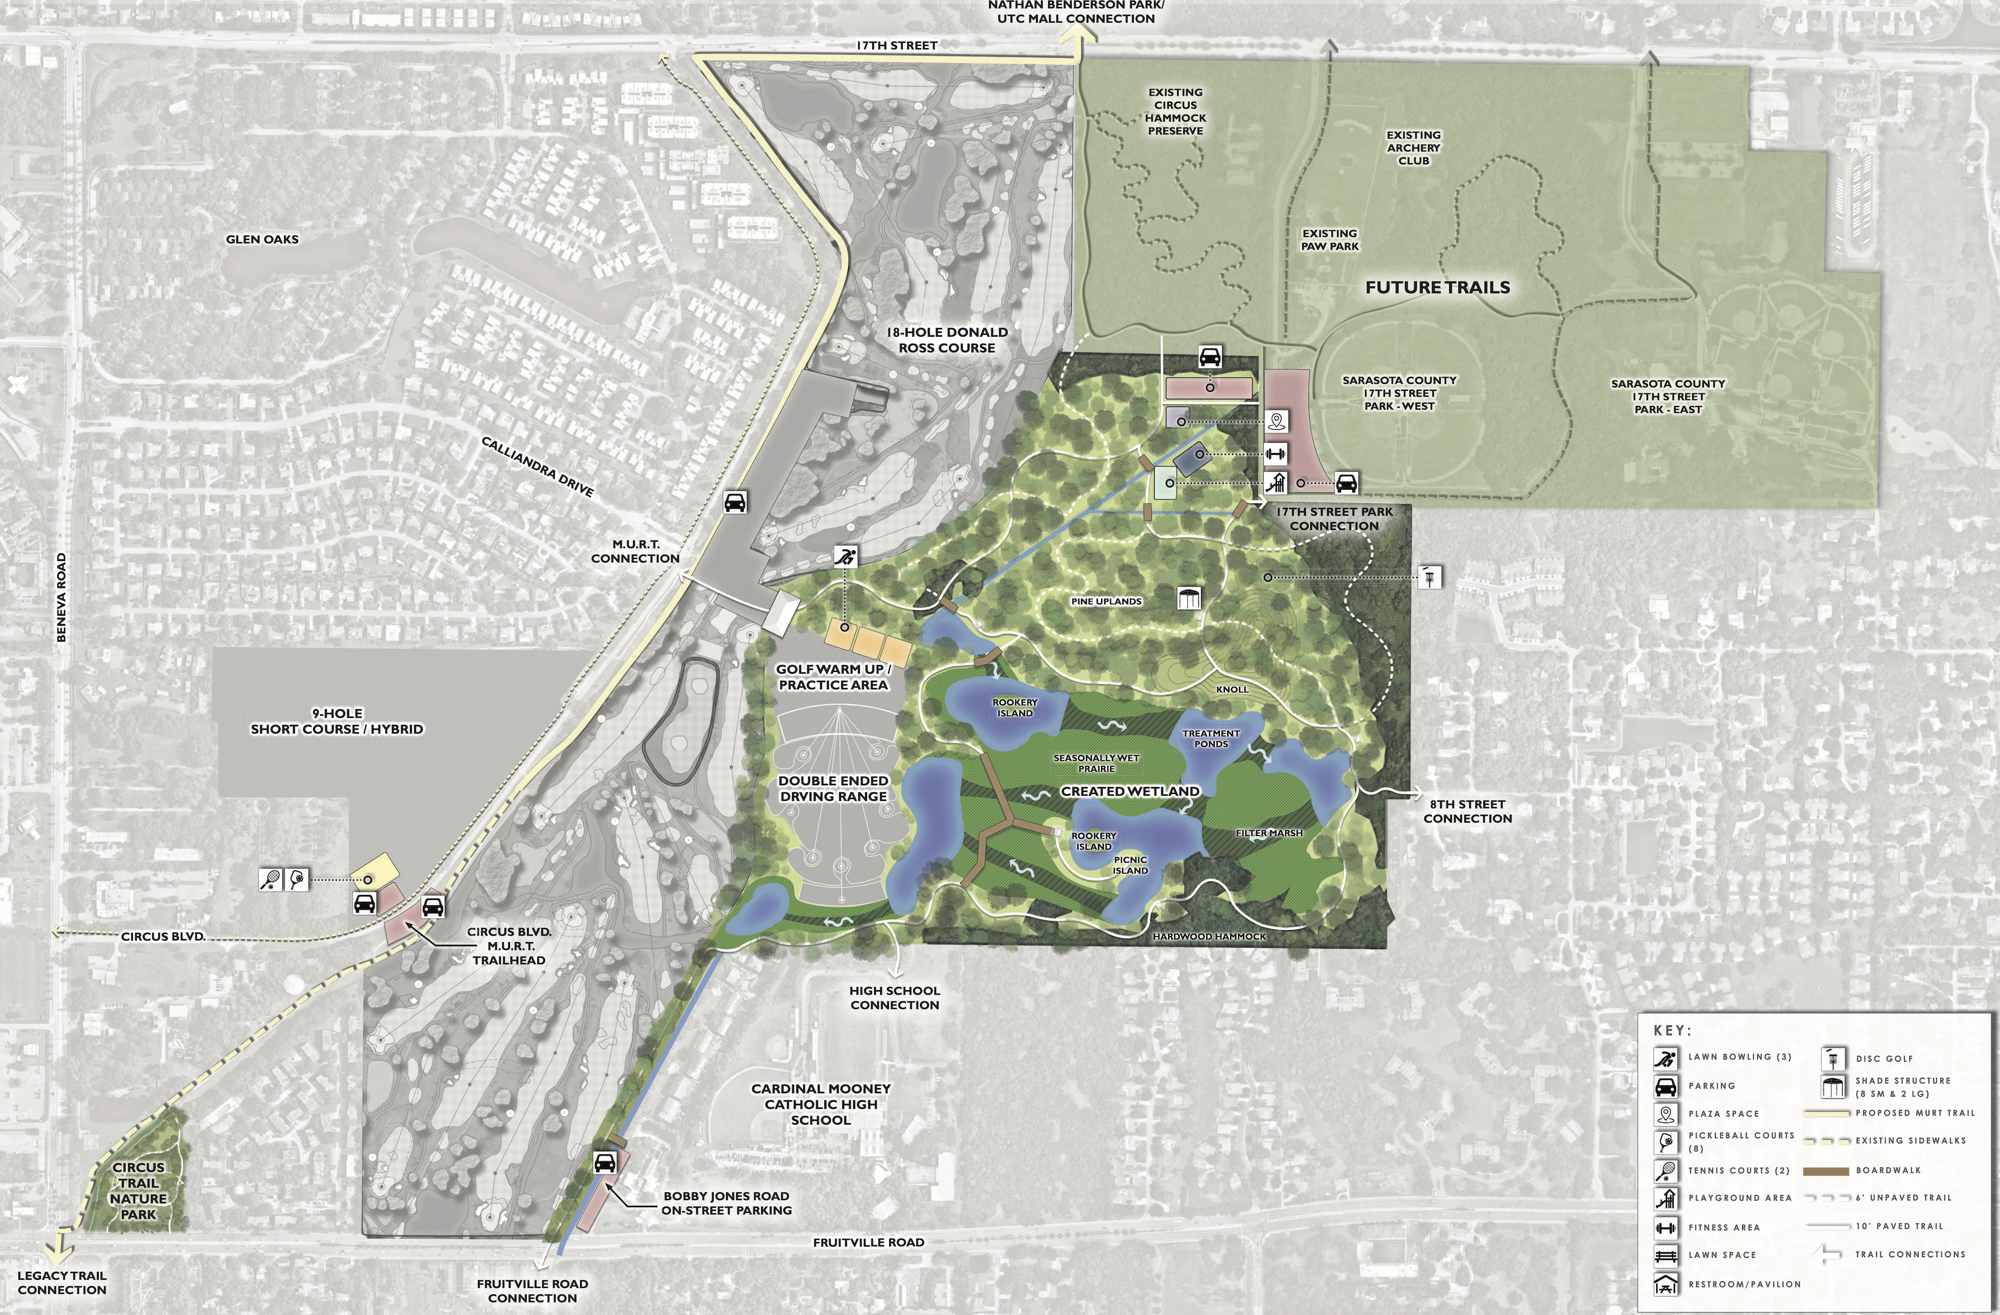 The consultant responsible for designing option three compared the park area to the Celery Fields, calling it an opportunity to emphasize natural environments alongside a downsized golf course.